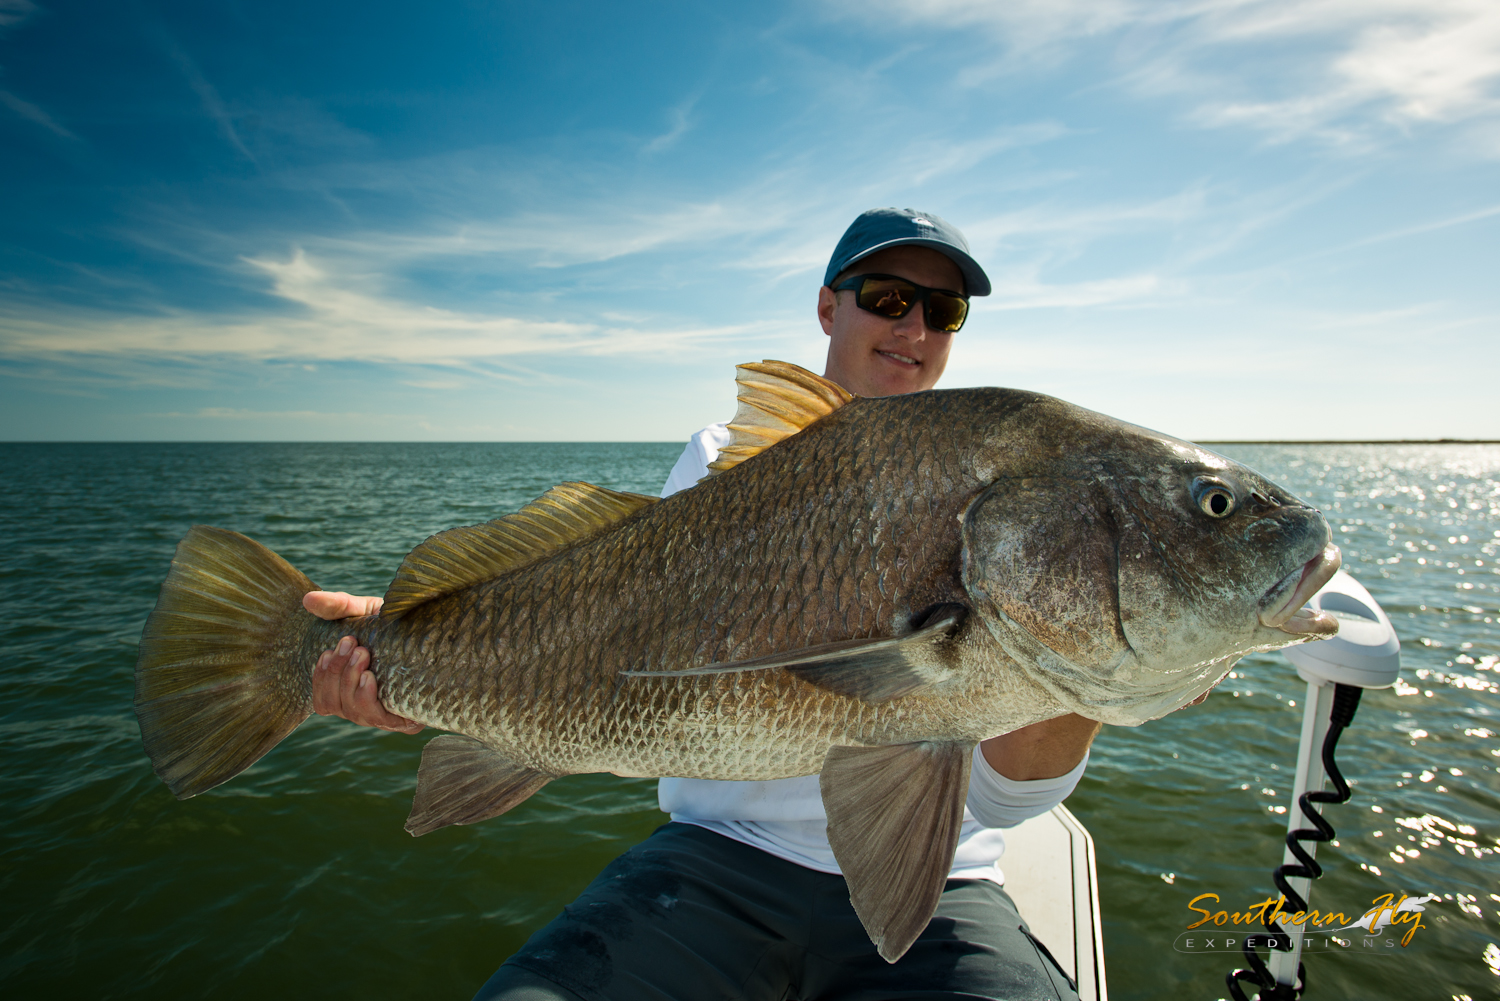 Monster Reds Fly Fishing Guide Venice Louisiana Southern Fly Expeditions